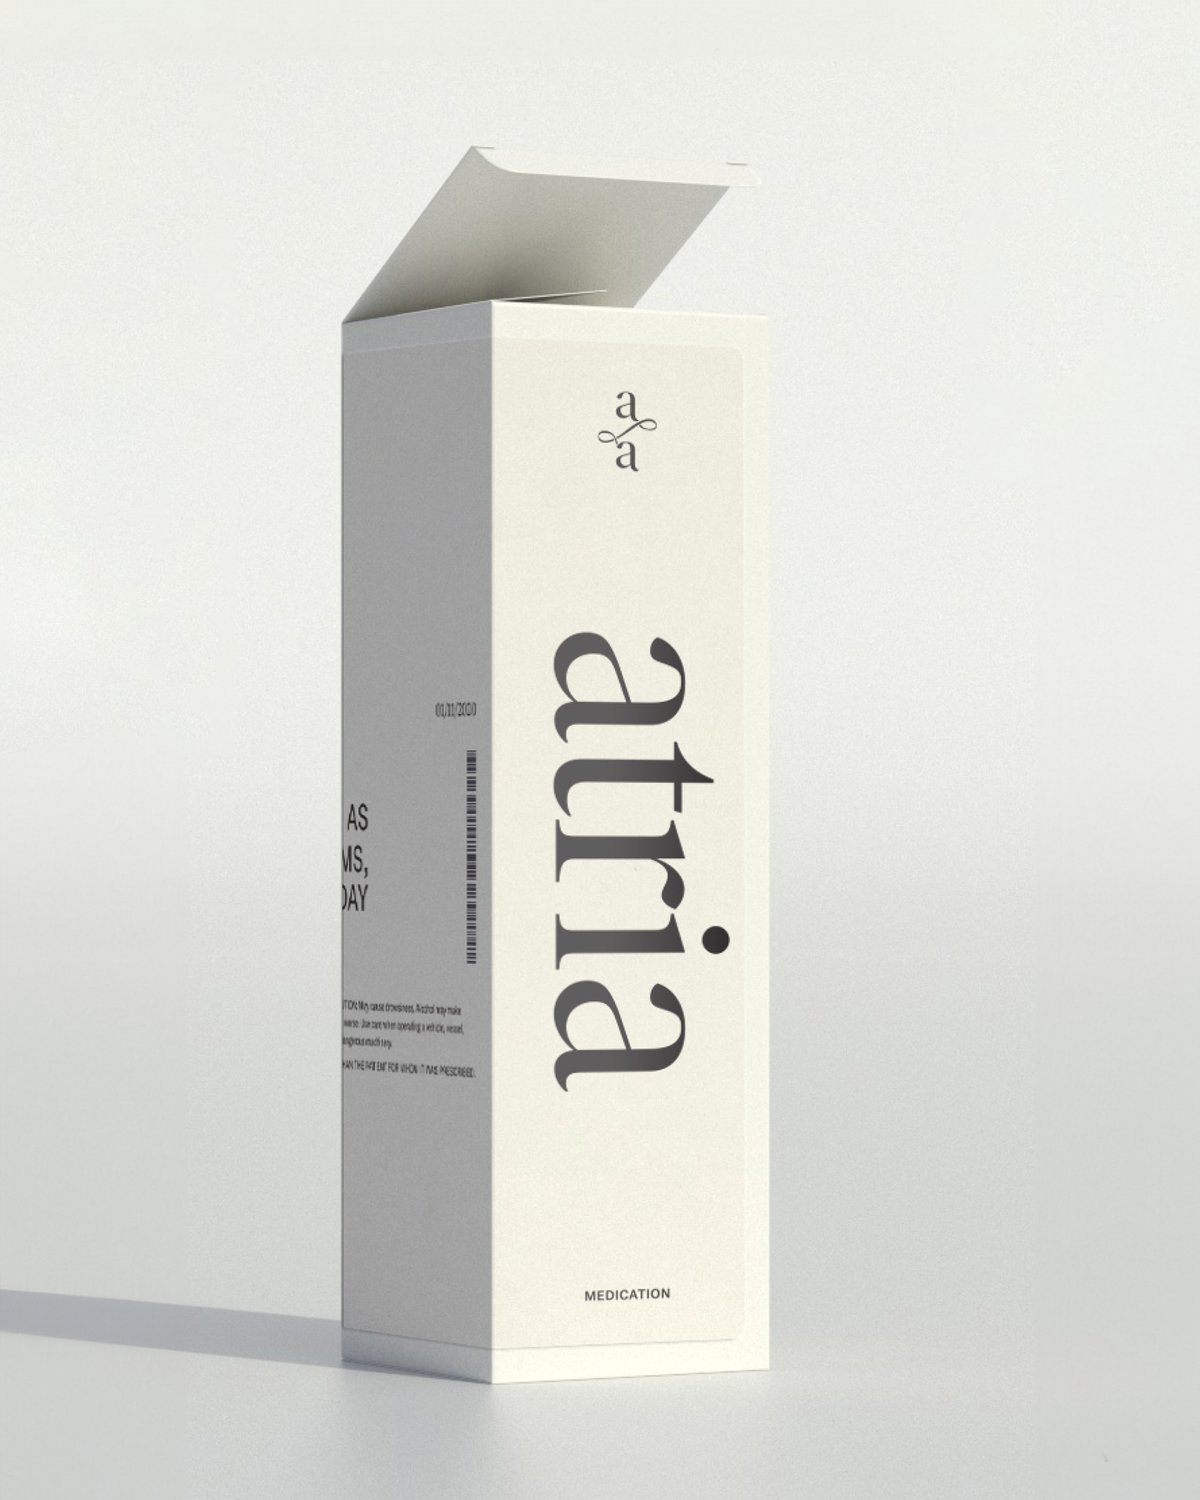 Packaging design of an elevated and branded white medication box with instructions on a plain white background